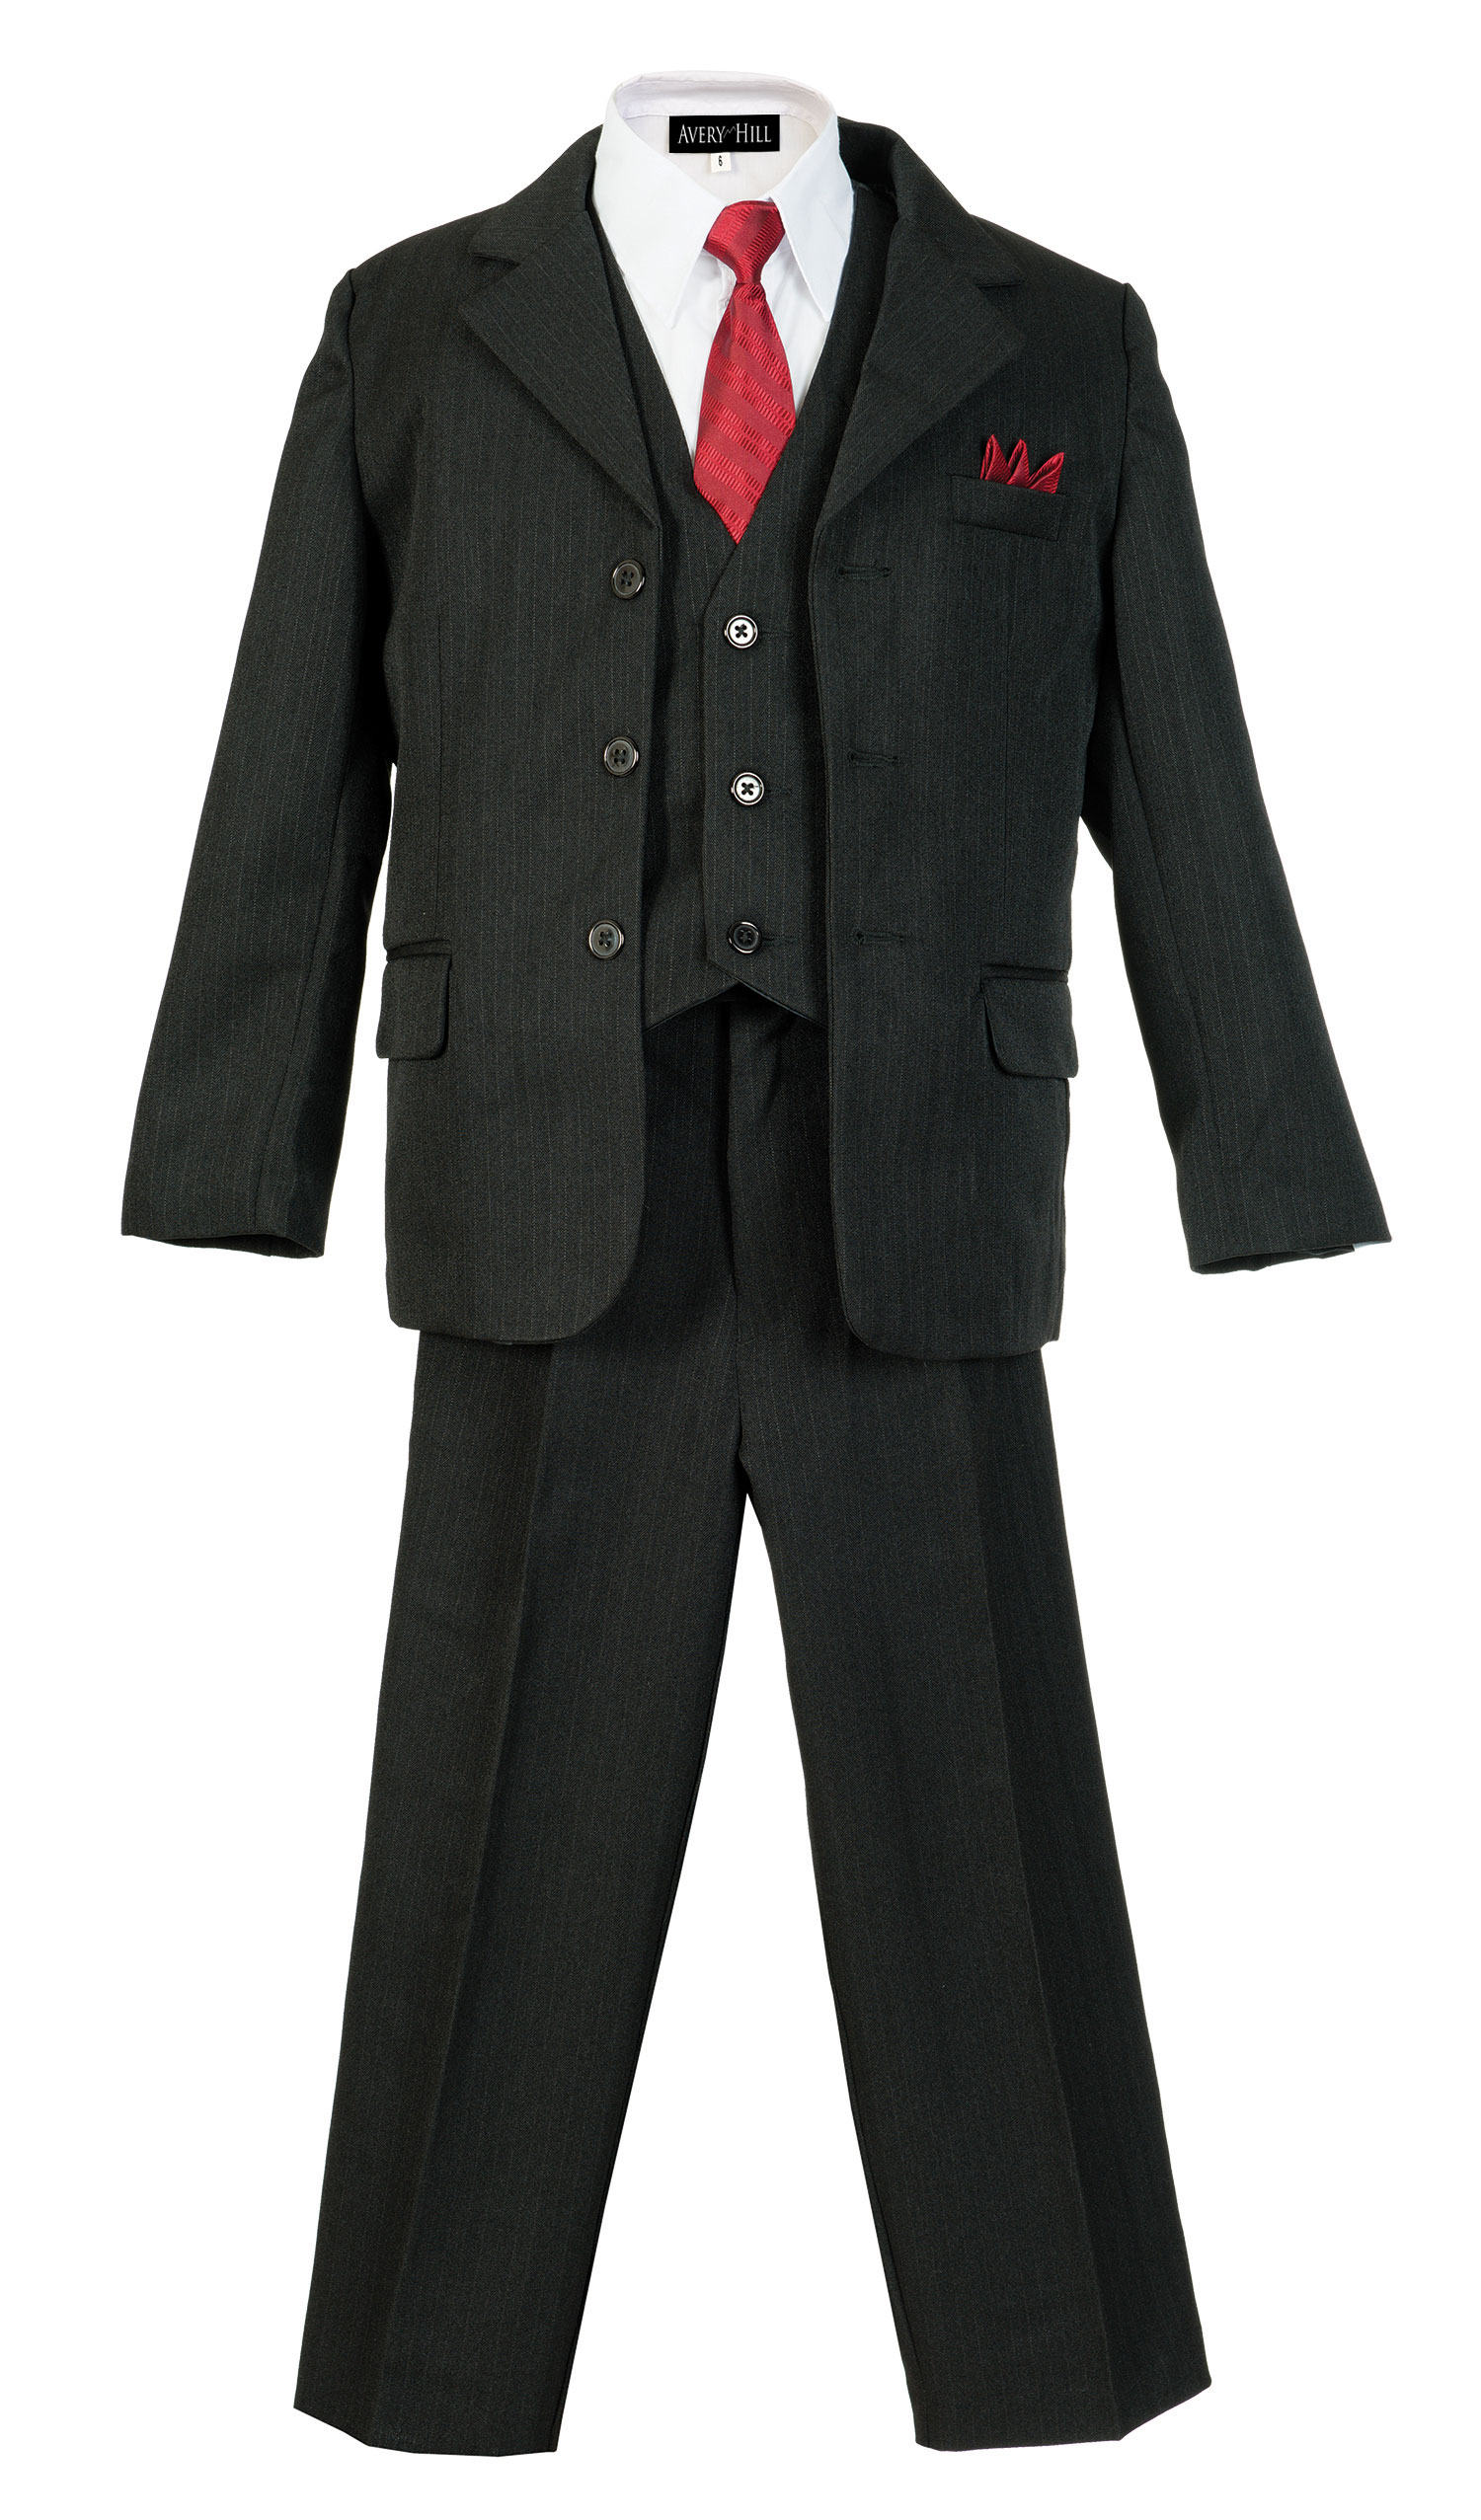 Boys Pinstripe Suit Set with Matching Tie BK 20